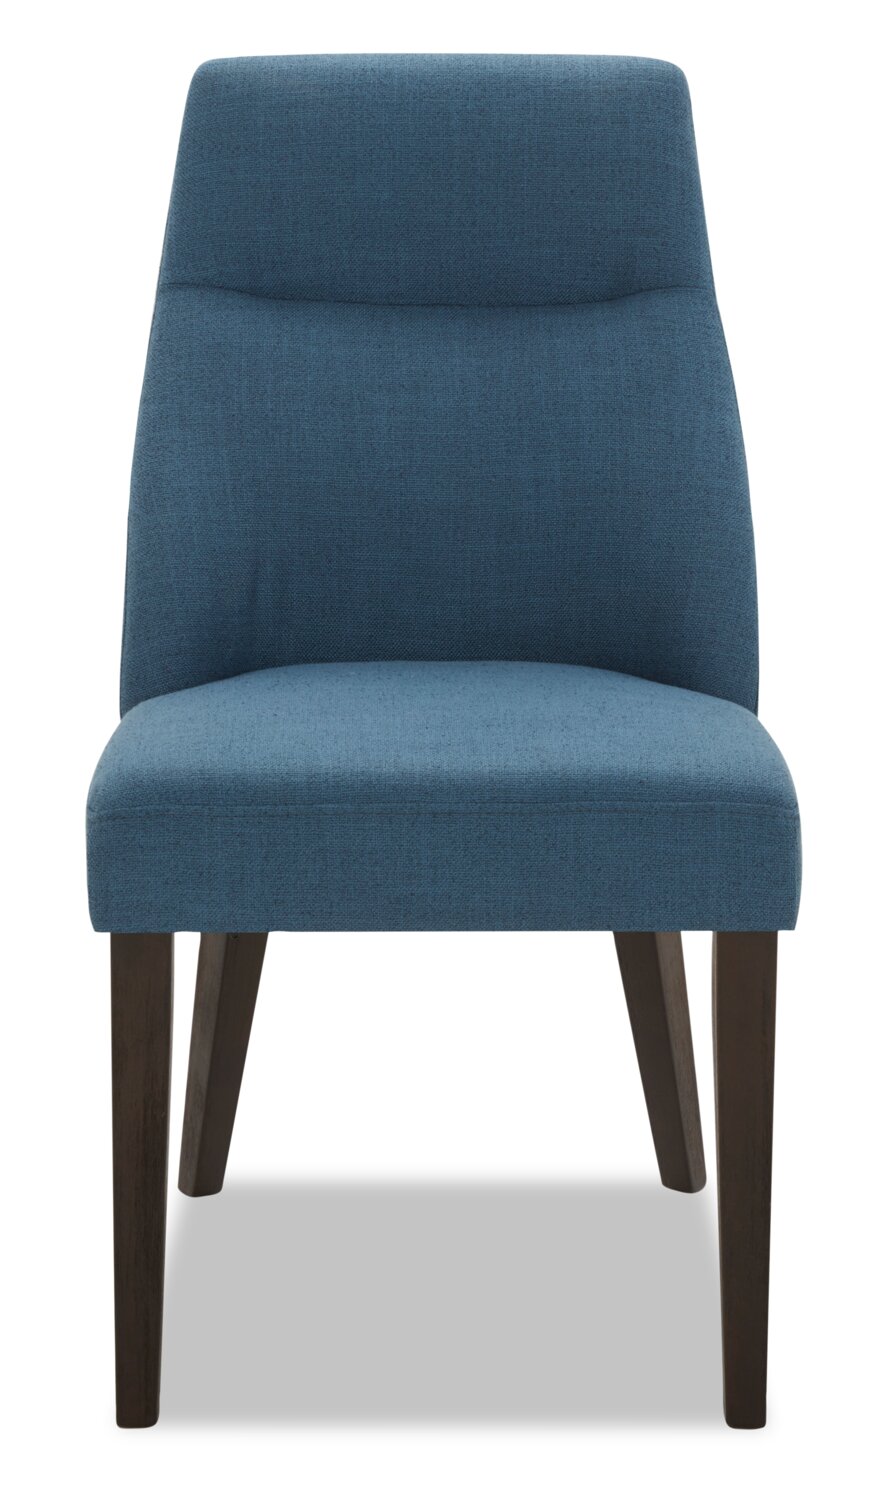 Ambrosia Accent Dining Chair - Blue